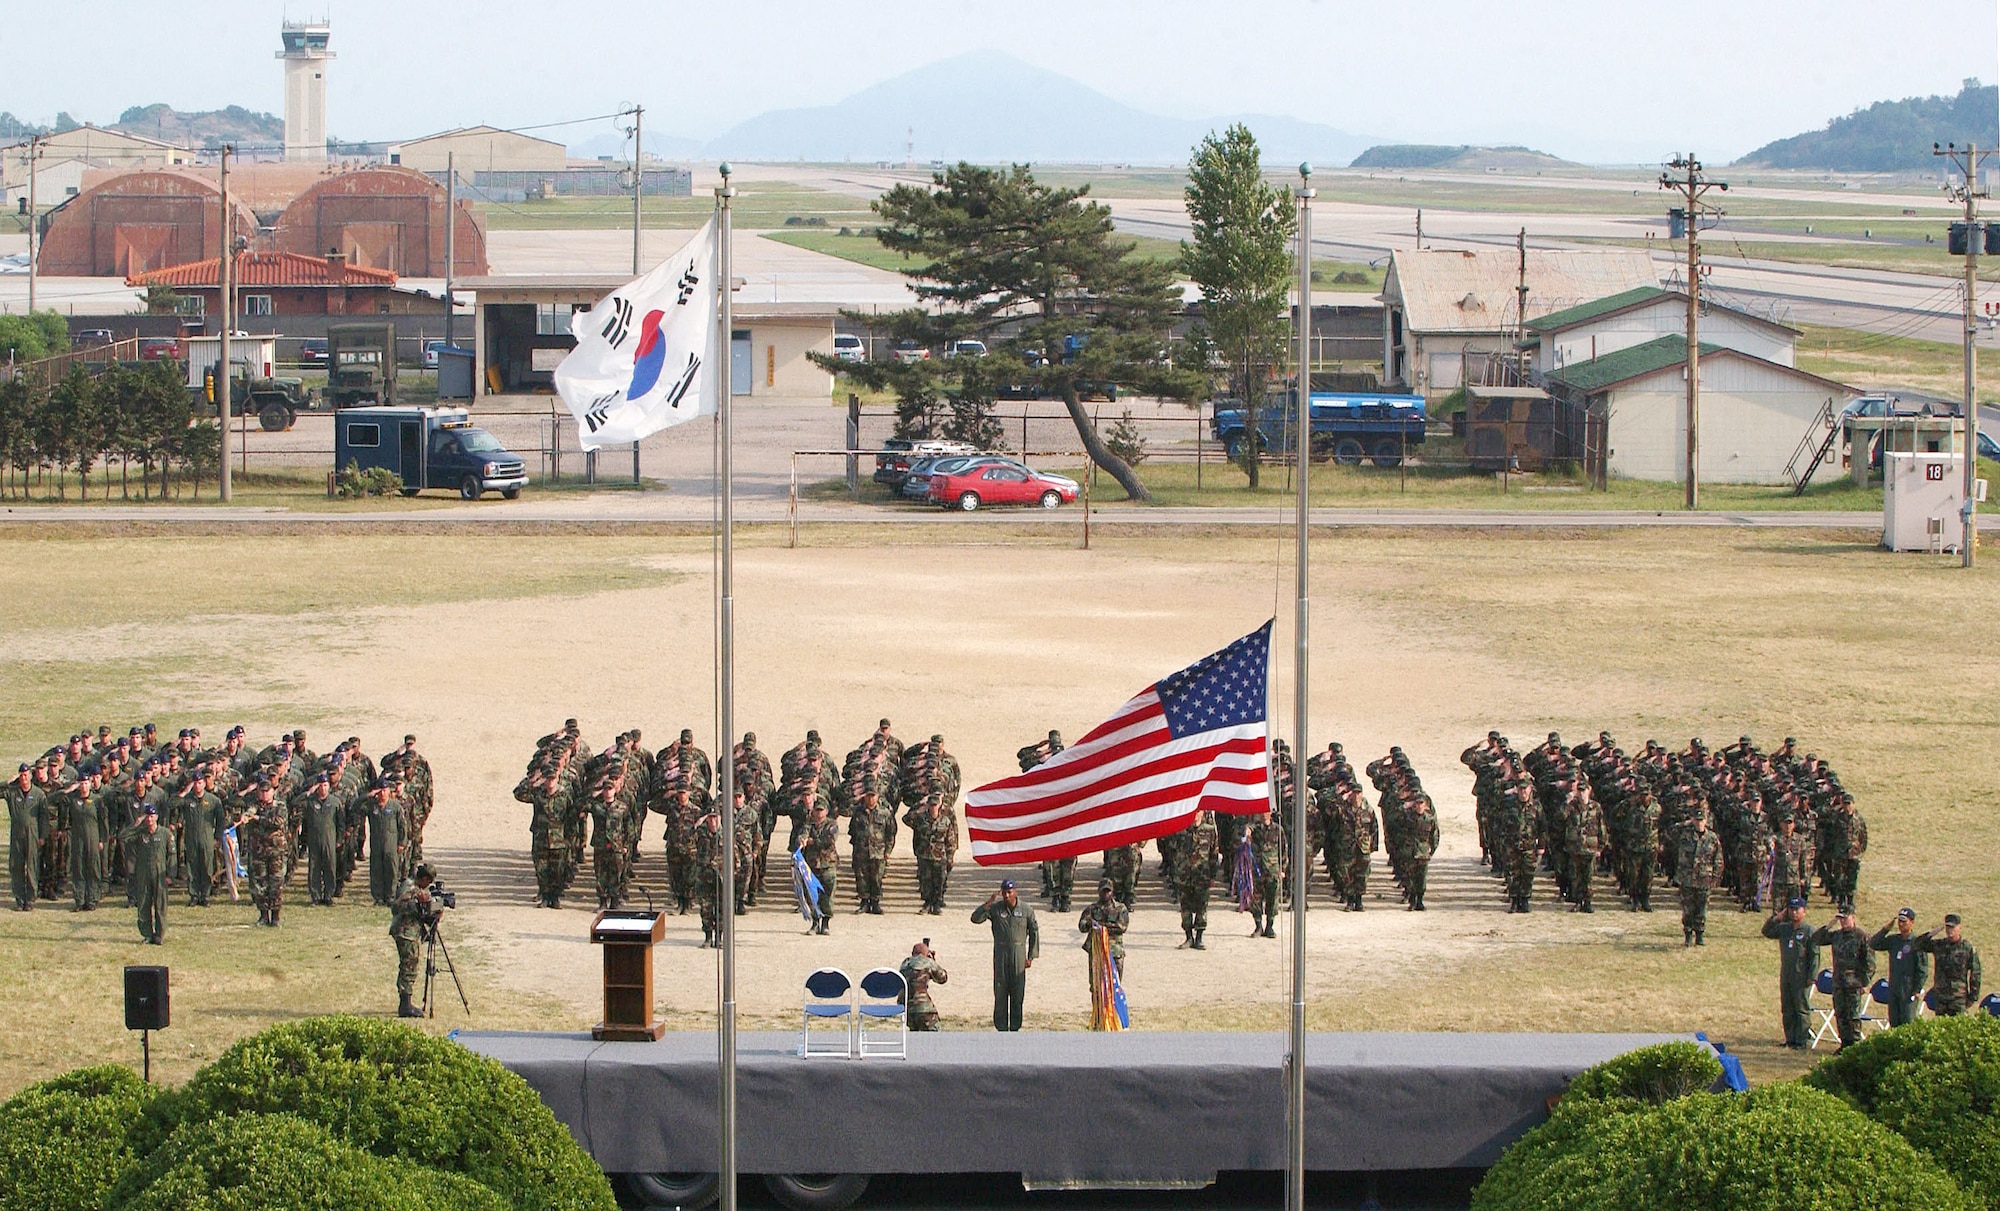 Airmen from the 8th Fighter Wing at Kunsan Air Base, South Korea, salute during a retreat ceremony that was part of the wing's commemoration event June 19 to honor the memory of Brig. Gen. Robin Olds, who passed away recently.  General Olds was a triple ace fighter pilot in World War II and Vietnam and a former commander of the then 8th Tactical Fighter Wing at Kunsan.  (U.S. Air Force Photo/Senior Airman Steven R. Doty) 